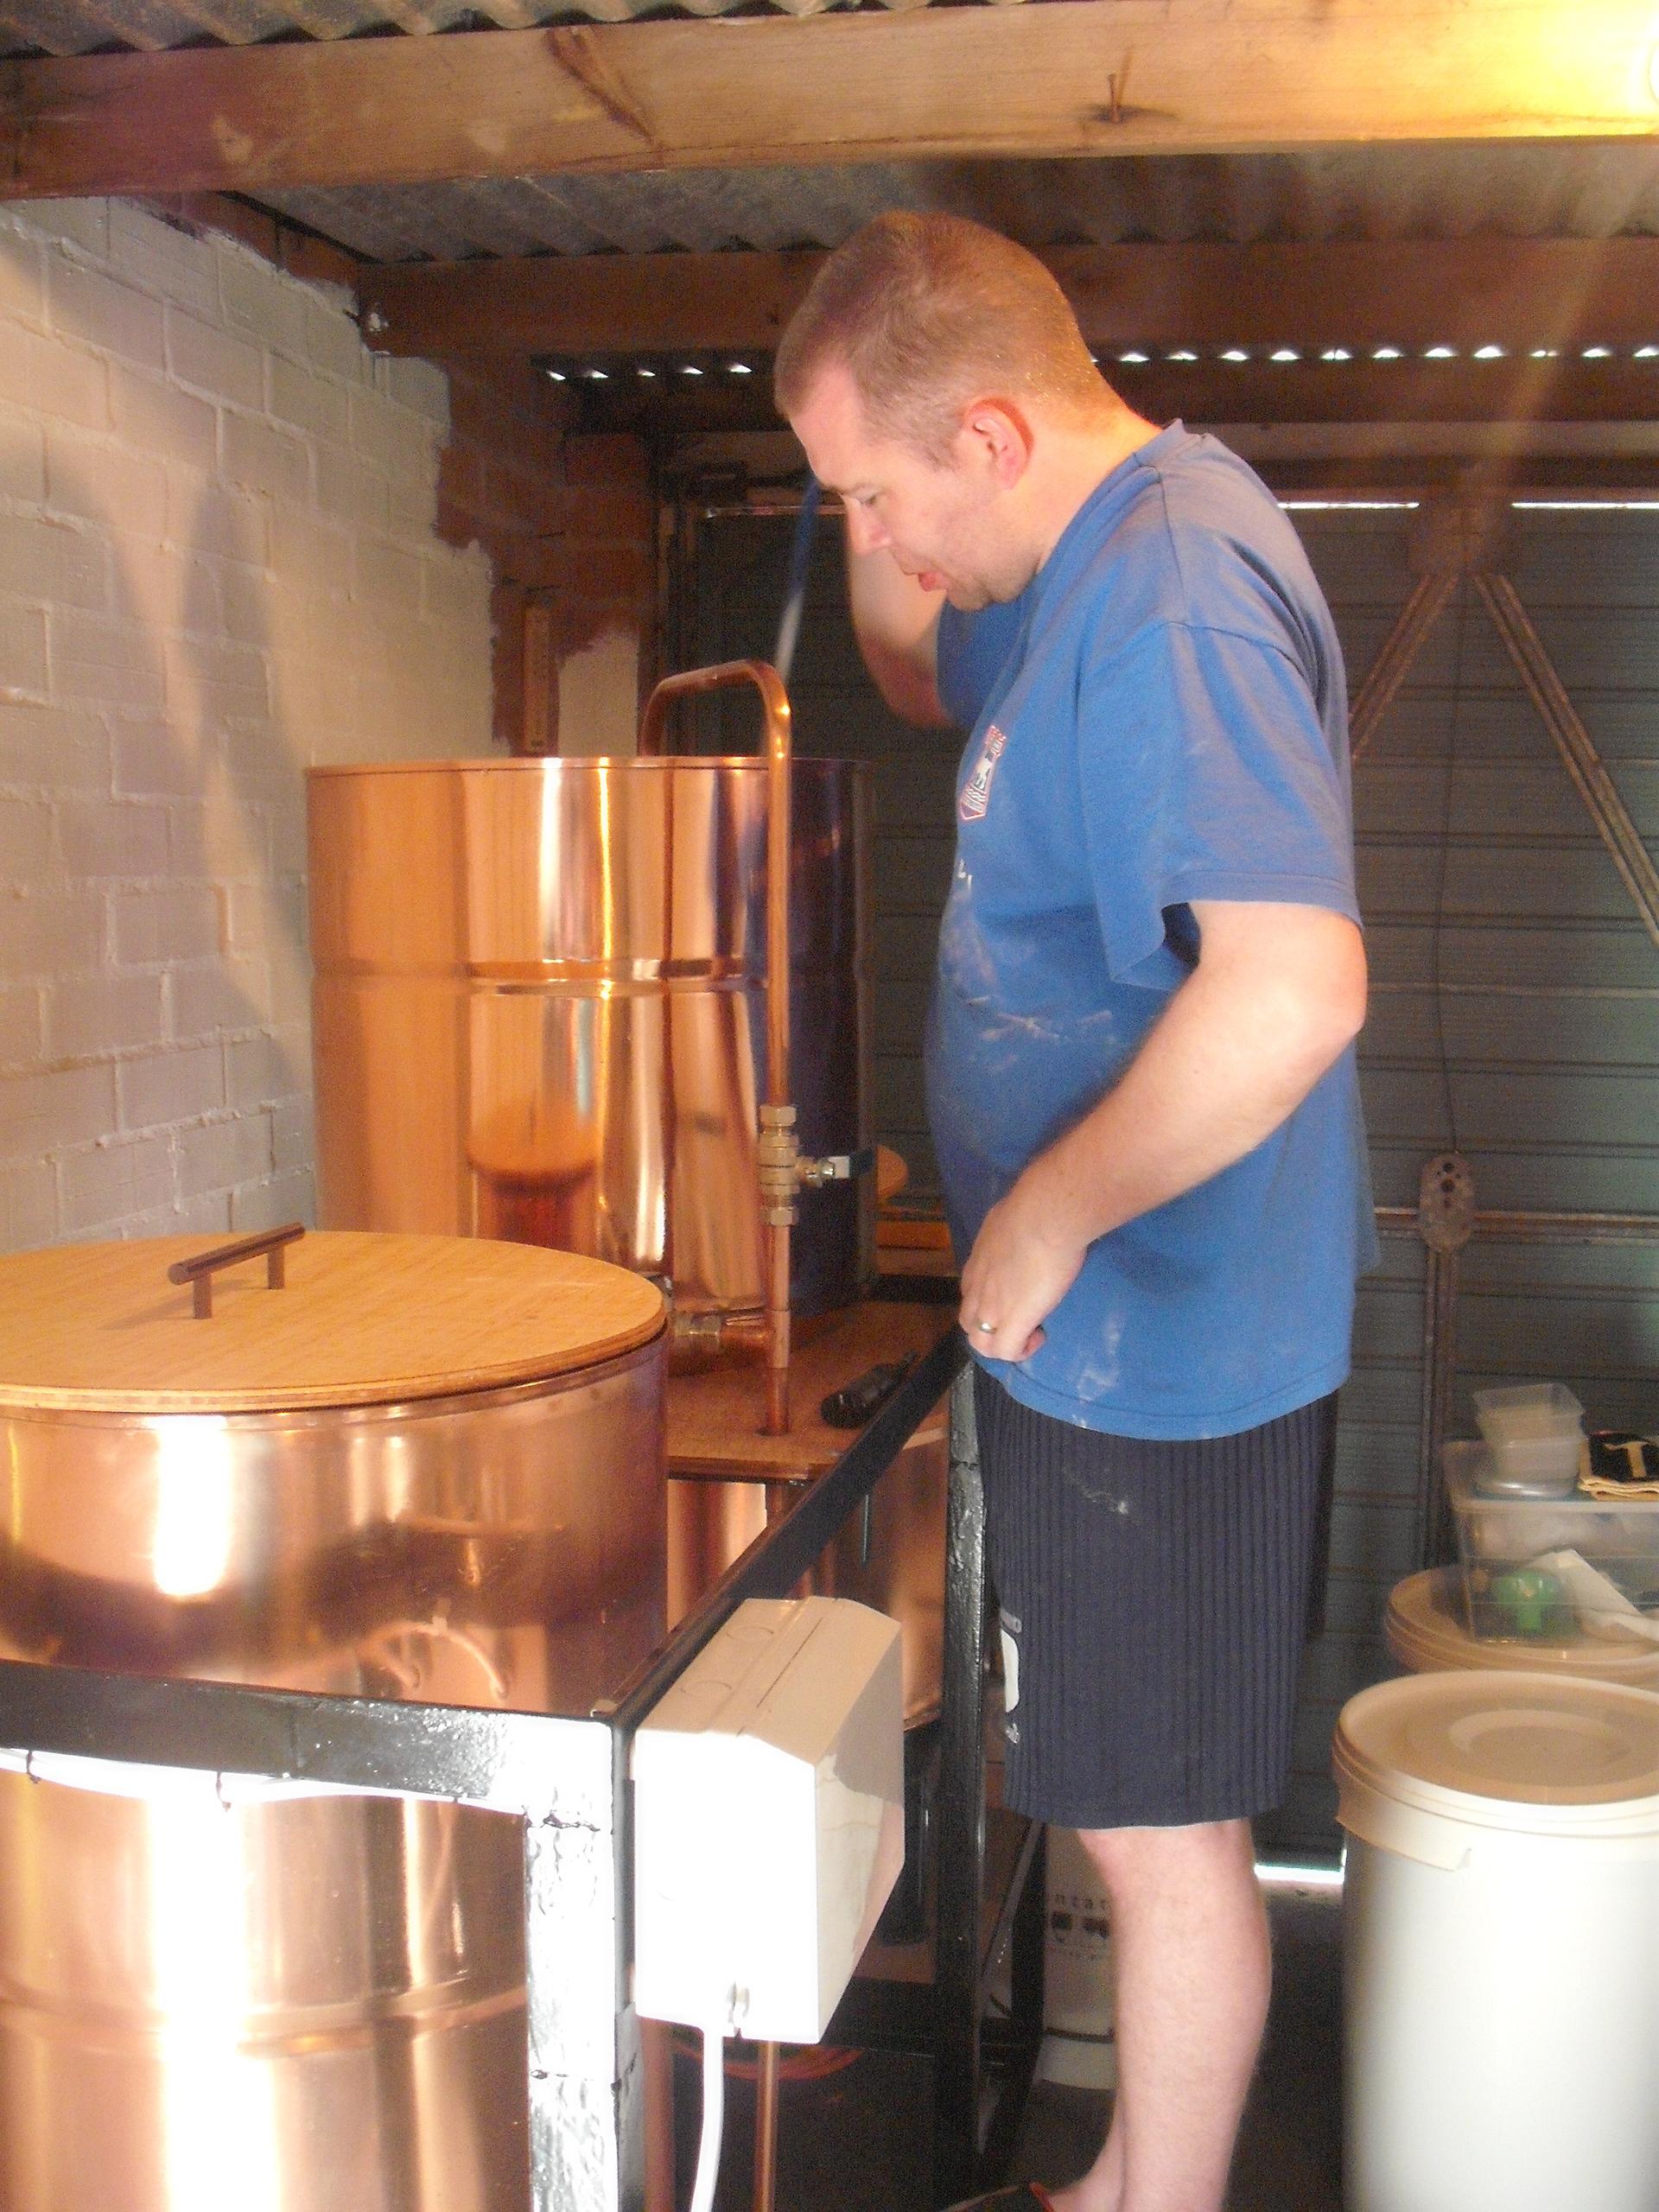 A man stands over a brewer's kit